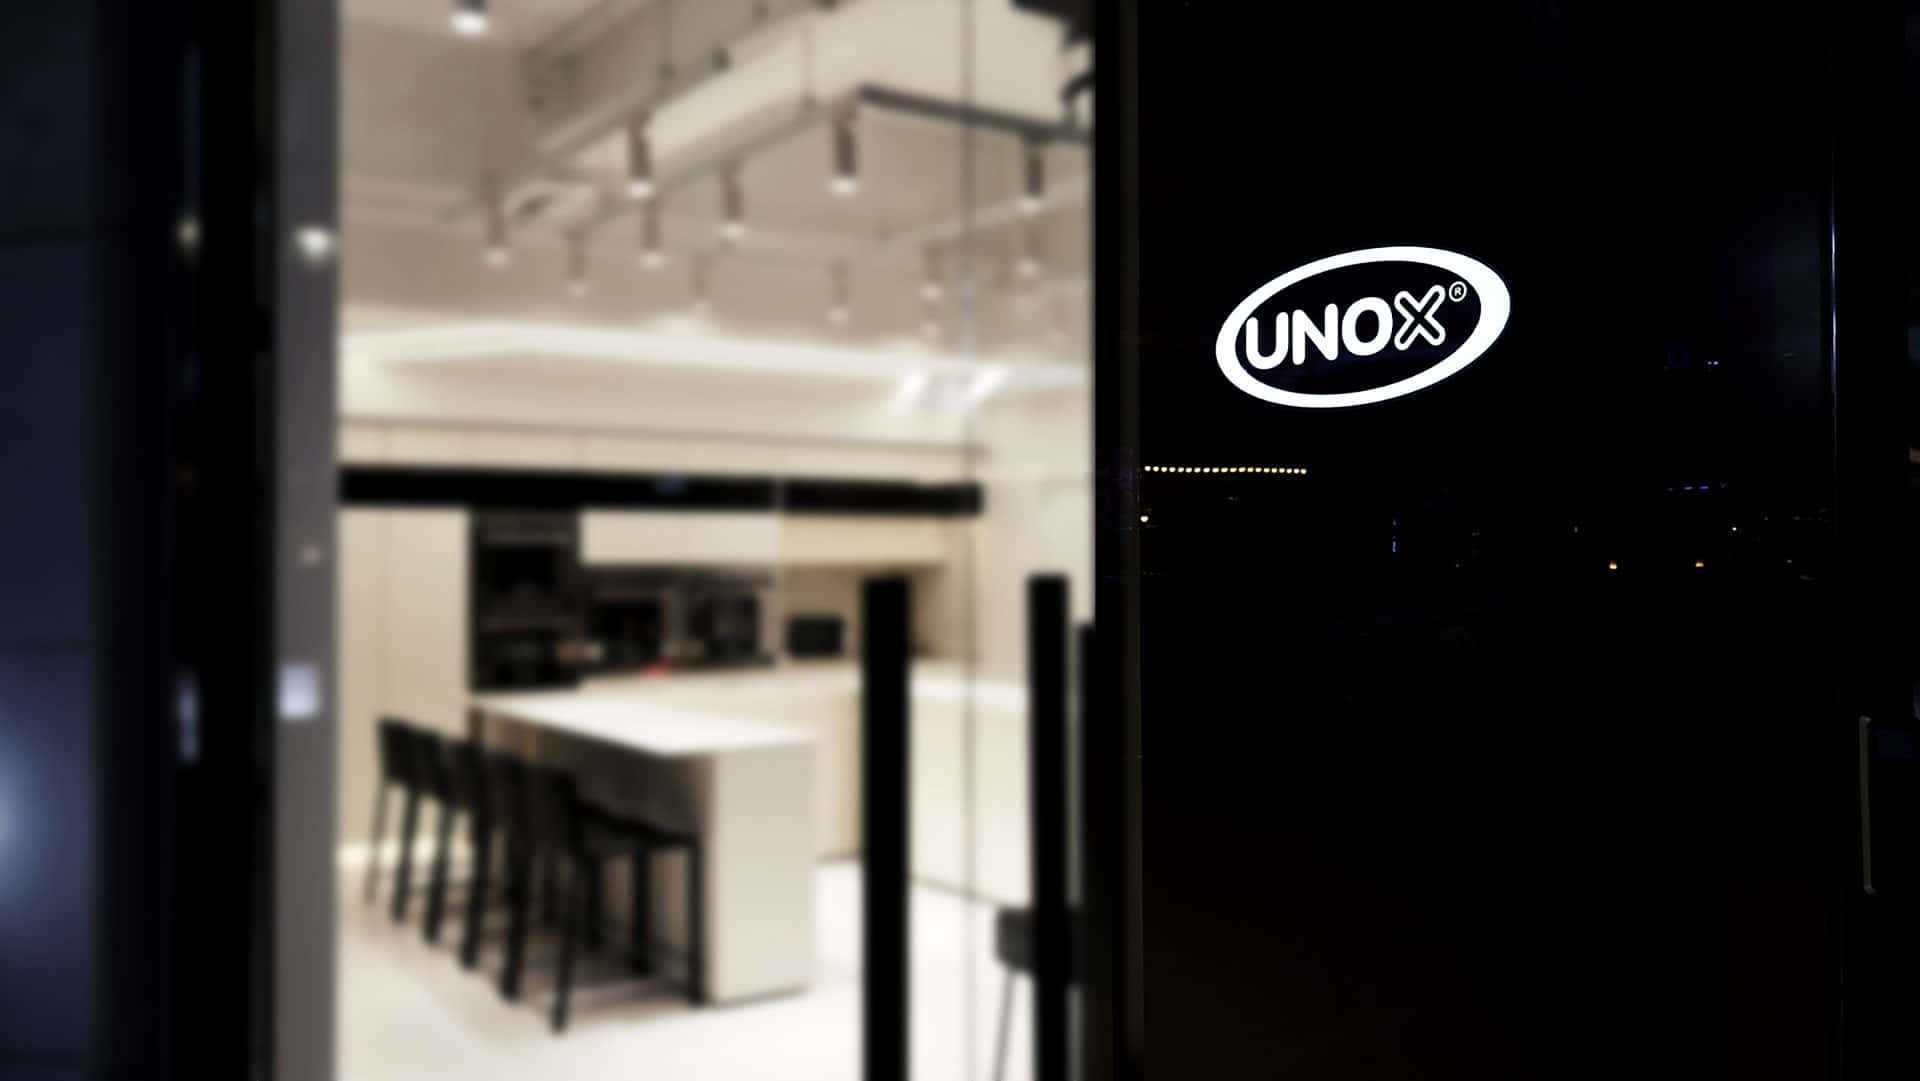 <strong style="color: rgb(255, 255, 255);">UNOX EXPERIENCE CENTER: more space for experience, less distance from our customers</strong></h1><p><br>